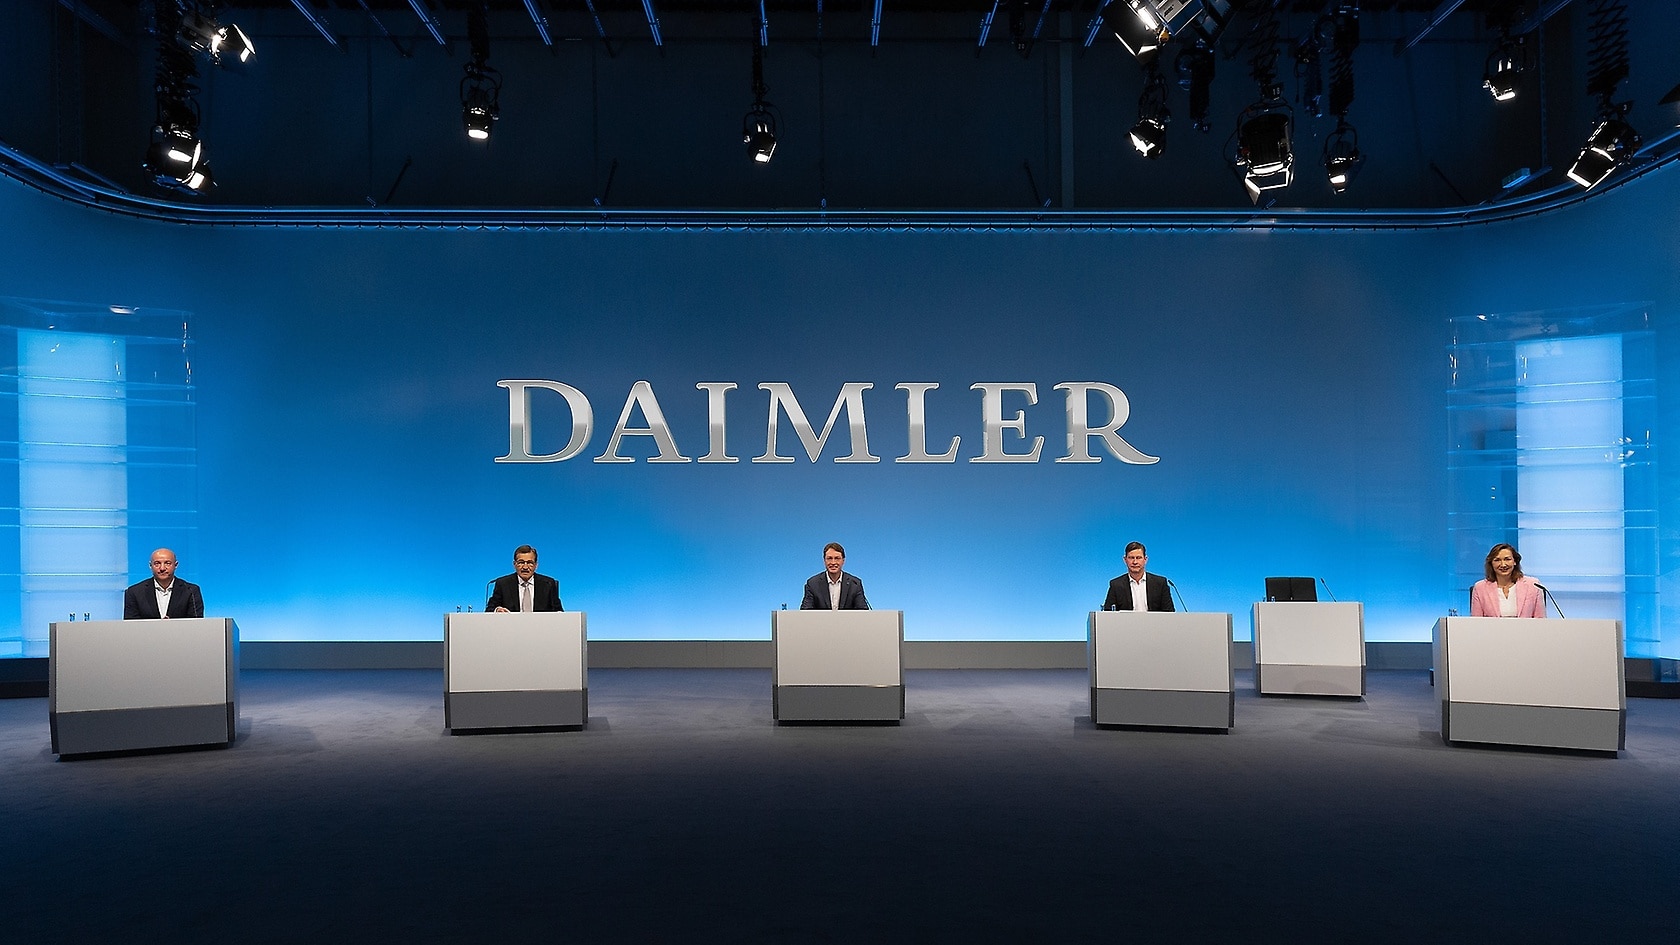 Virtual Annual Shareholder’s Meeting of Daimler AG at July 8, 2020: (from left to right) Michael Brecht, Deputy Chairman of the Supervisory Board; Manfred Bischoff, Chairman of the Supervisory Board; Ola Källenius, Chairman of the Board of Management; Harald Wilhelm, Chief Financial Officer; Renata Jungo Brüngger, Member of the Board of Management Integrity & Legal.